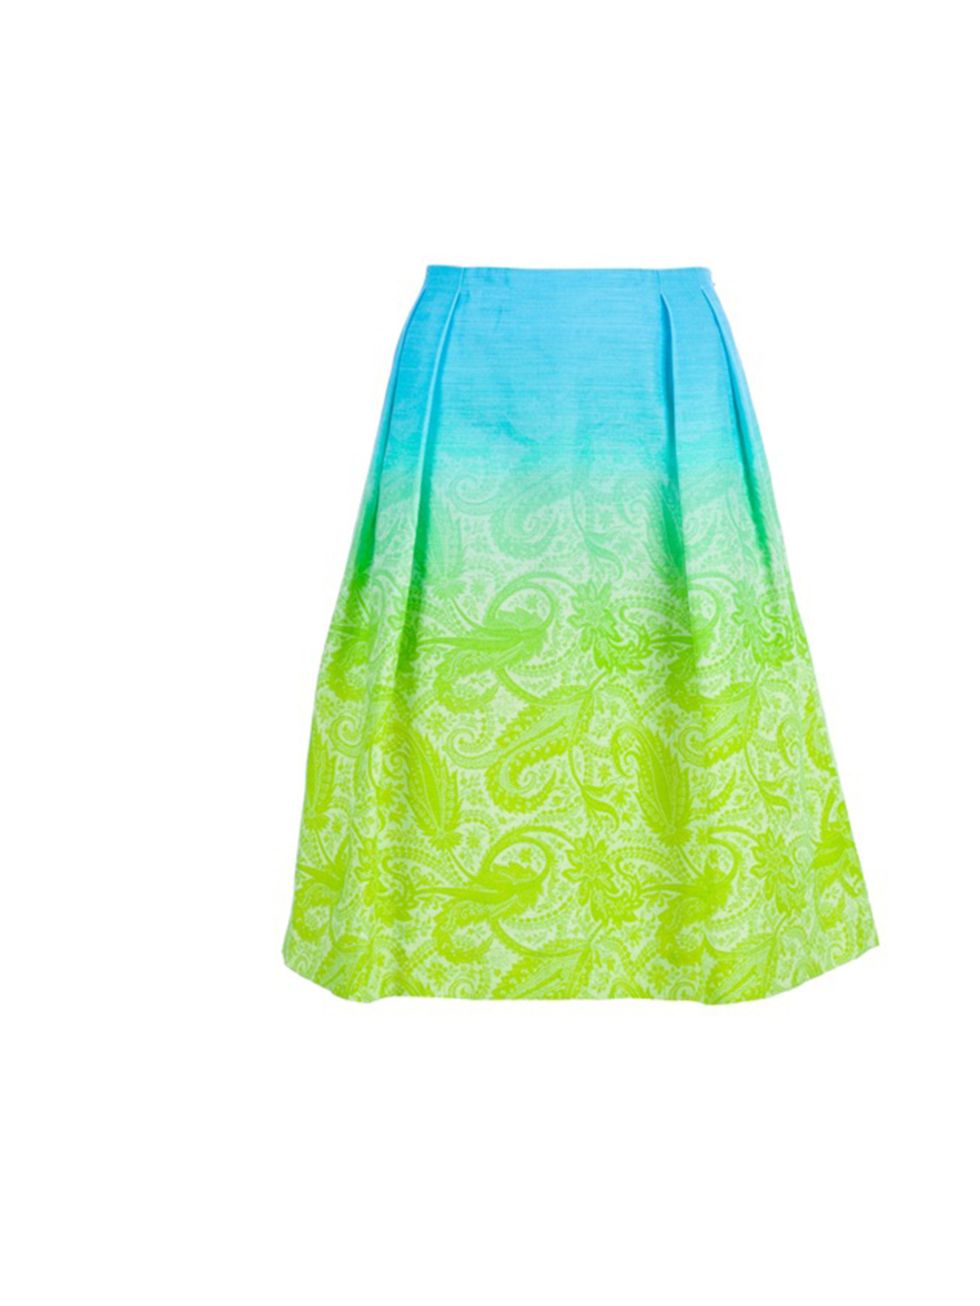 <p>Jonathan Saunders 'Harmont' printed full skirt, £513, at Farfetch</p><p><a href="http://shopping.elleuk.com/browse?fts=jonathan+saunders+harmont+skirt">BUY NOW</a></p>